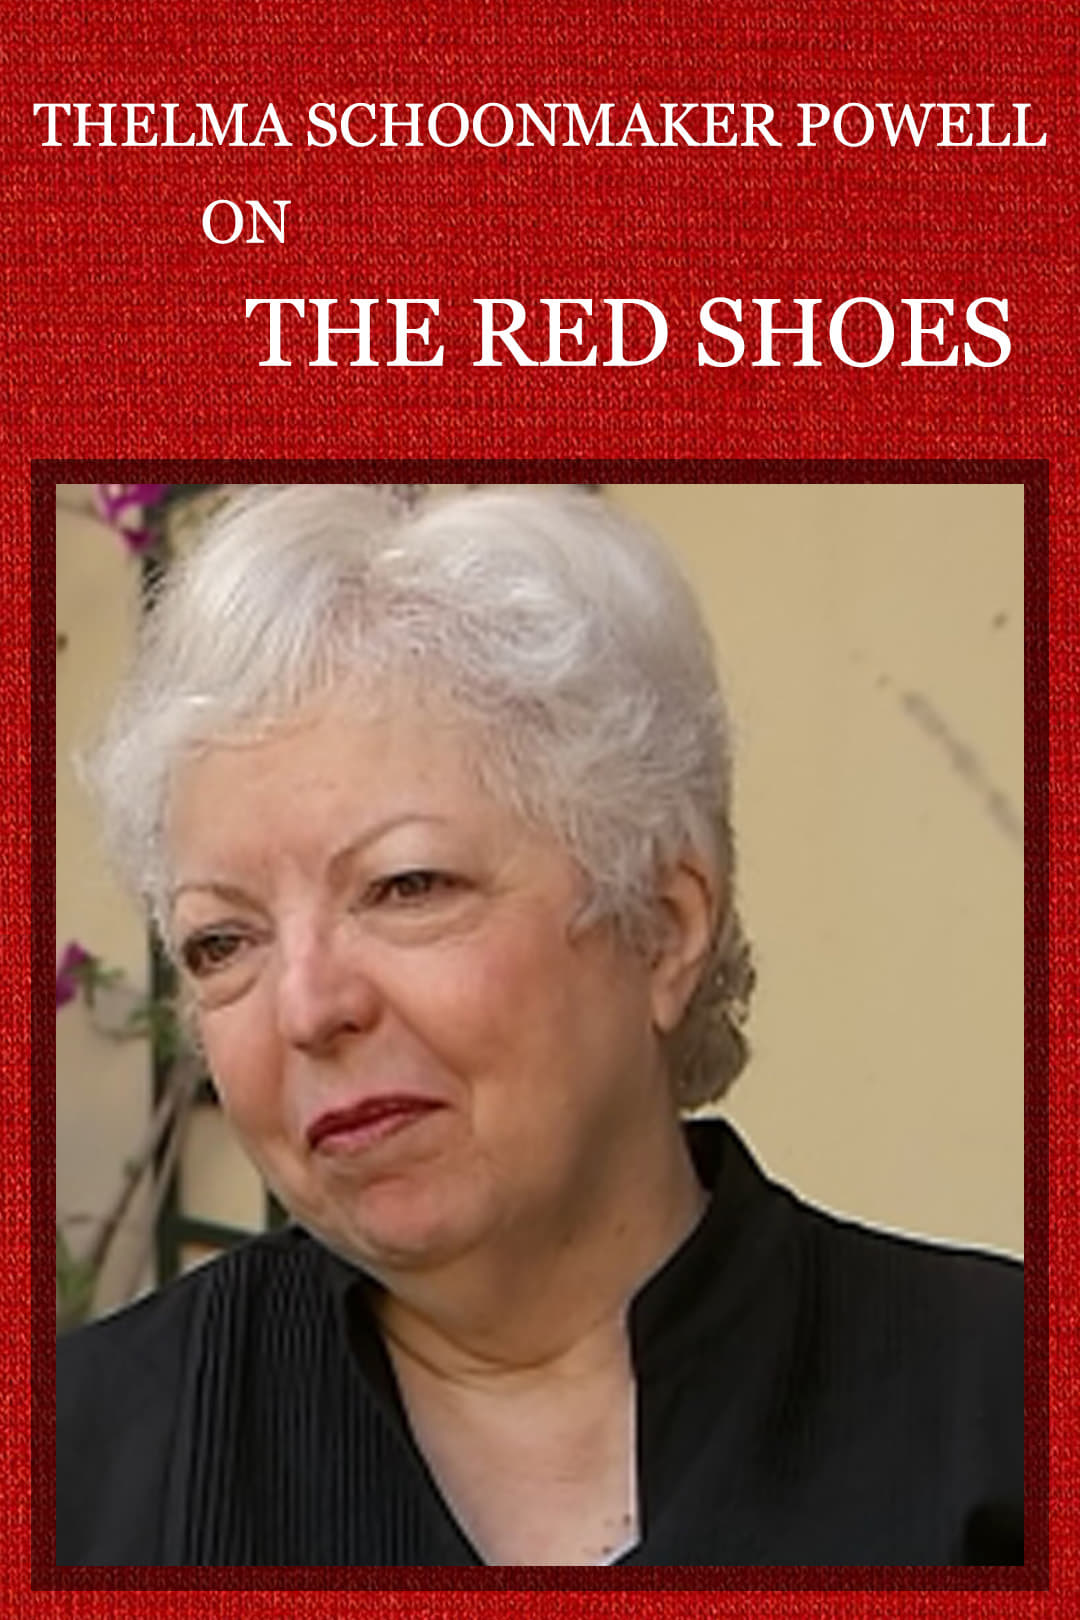 Thelma Schoonmaker Powell on 'The Red Shoes'